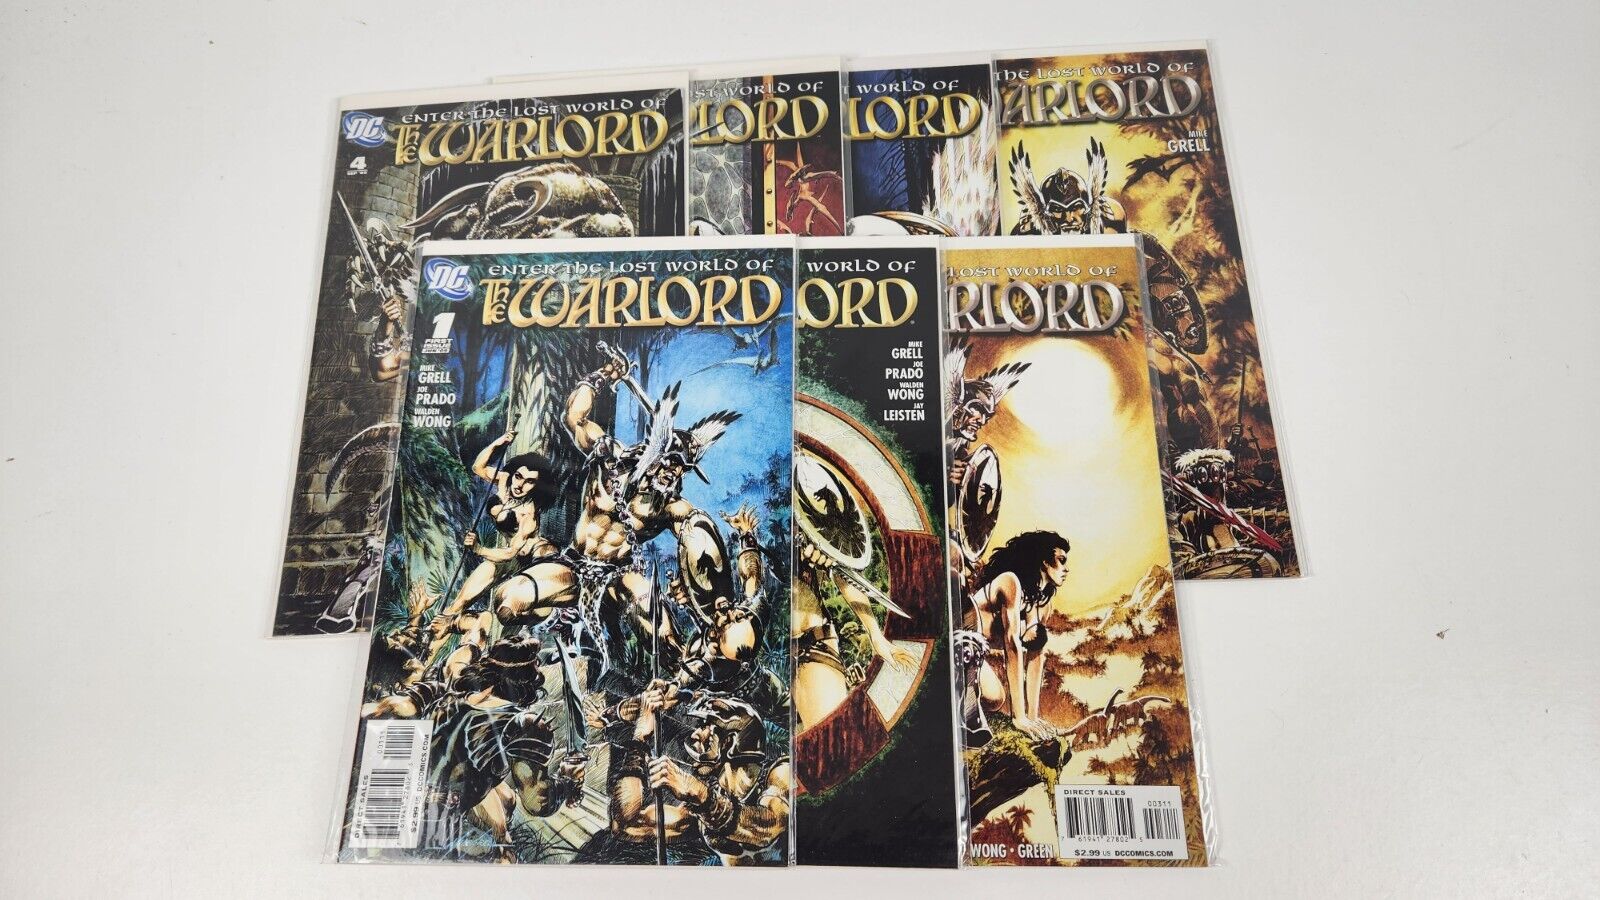 The Warlord Vol 4 (DC 2009) #1-7